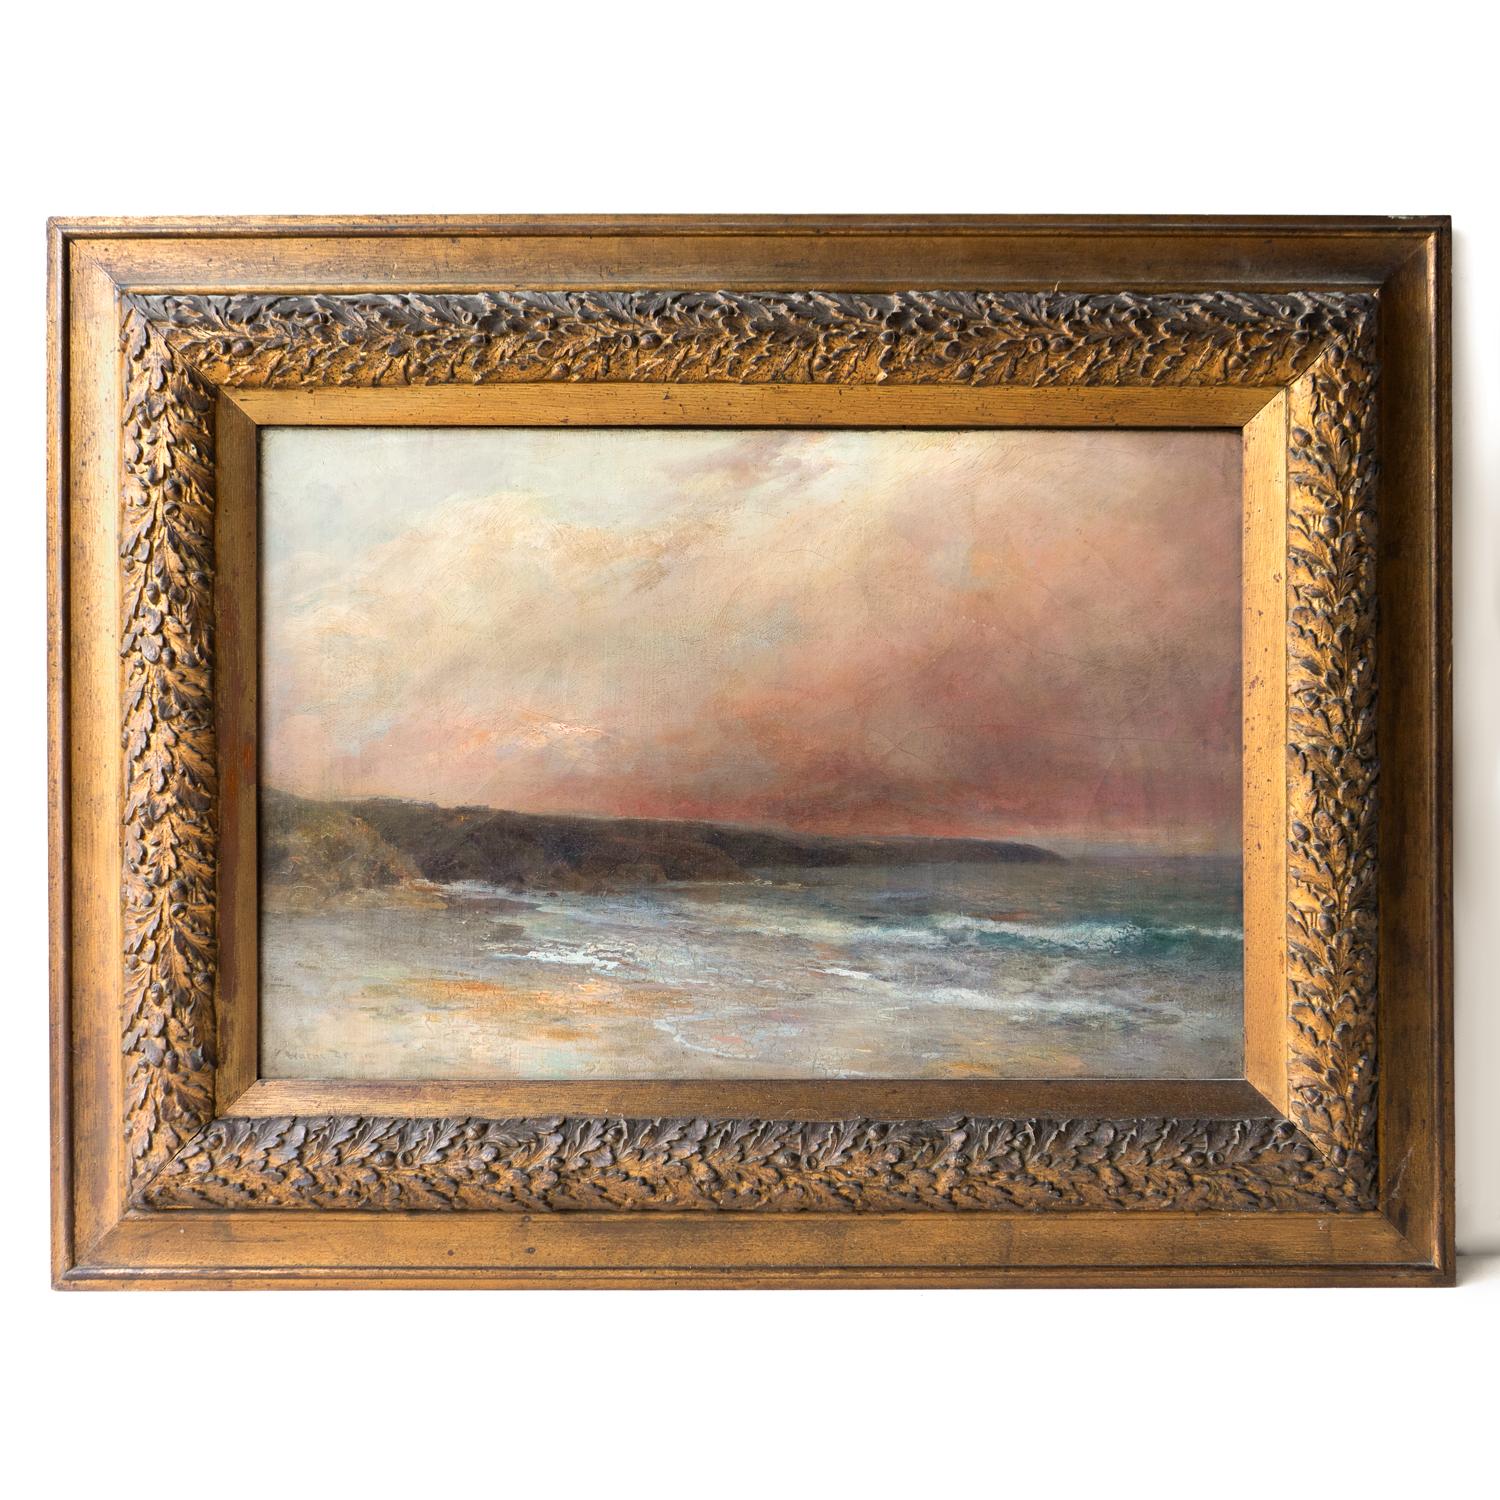 Antique Original Impressionist Oil on Canvas Landscape Painting

Alfred Joseph Warne-Browne RSO NSA (1855-1915) was a London-based artist who moved to St. Uny close to St. Ives around 1890 where he specialised in seascapes. He was a member of the